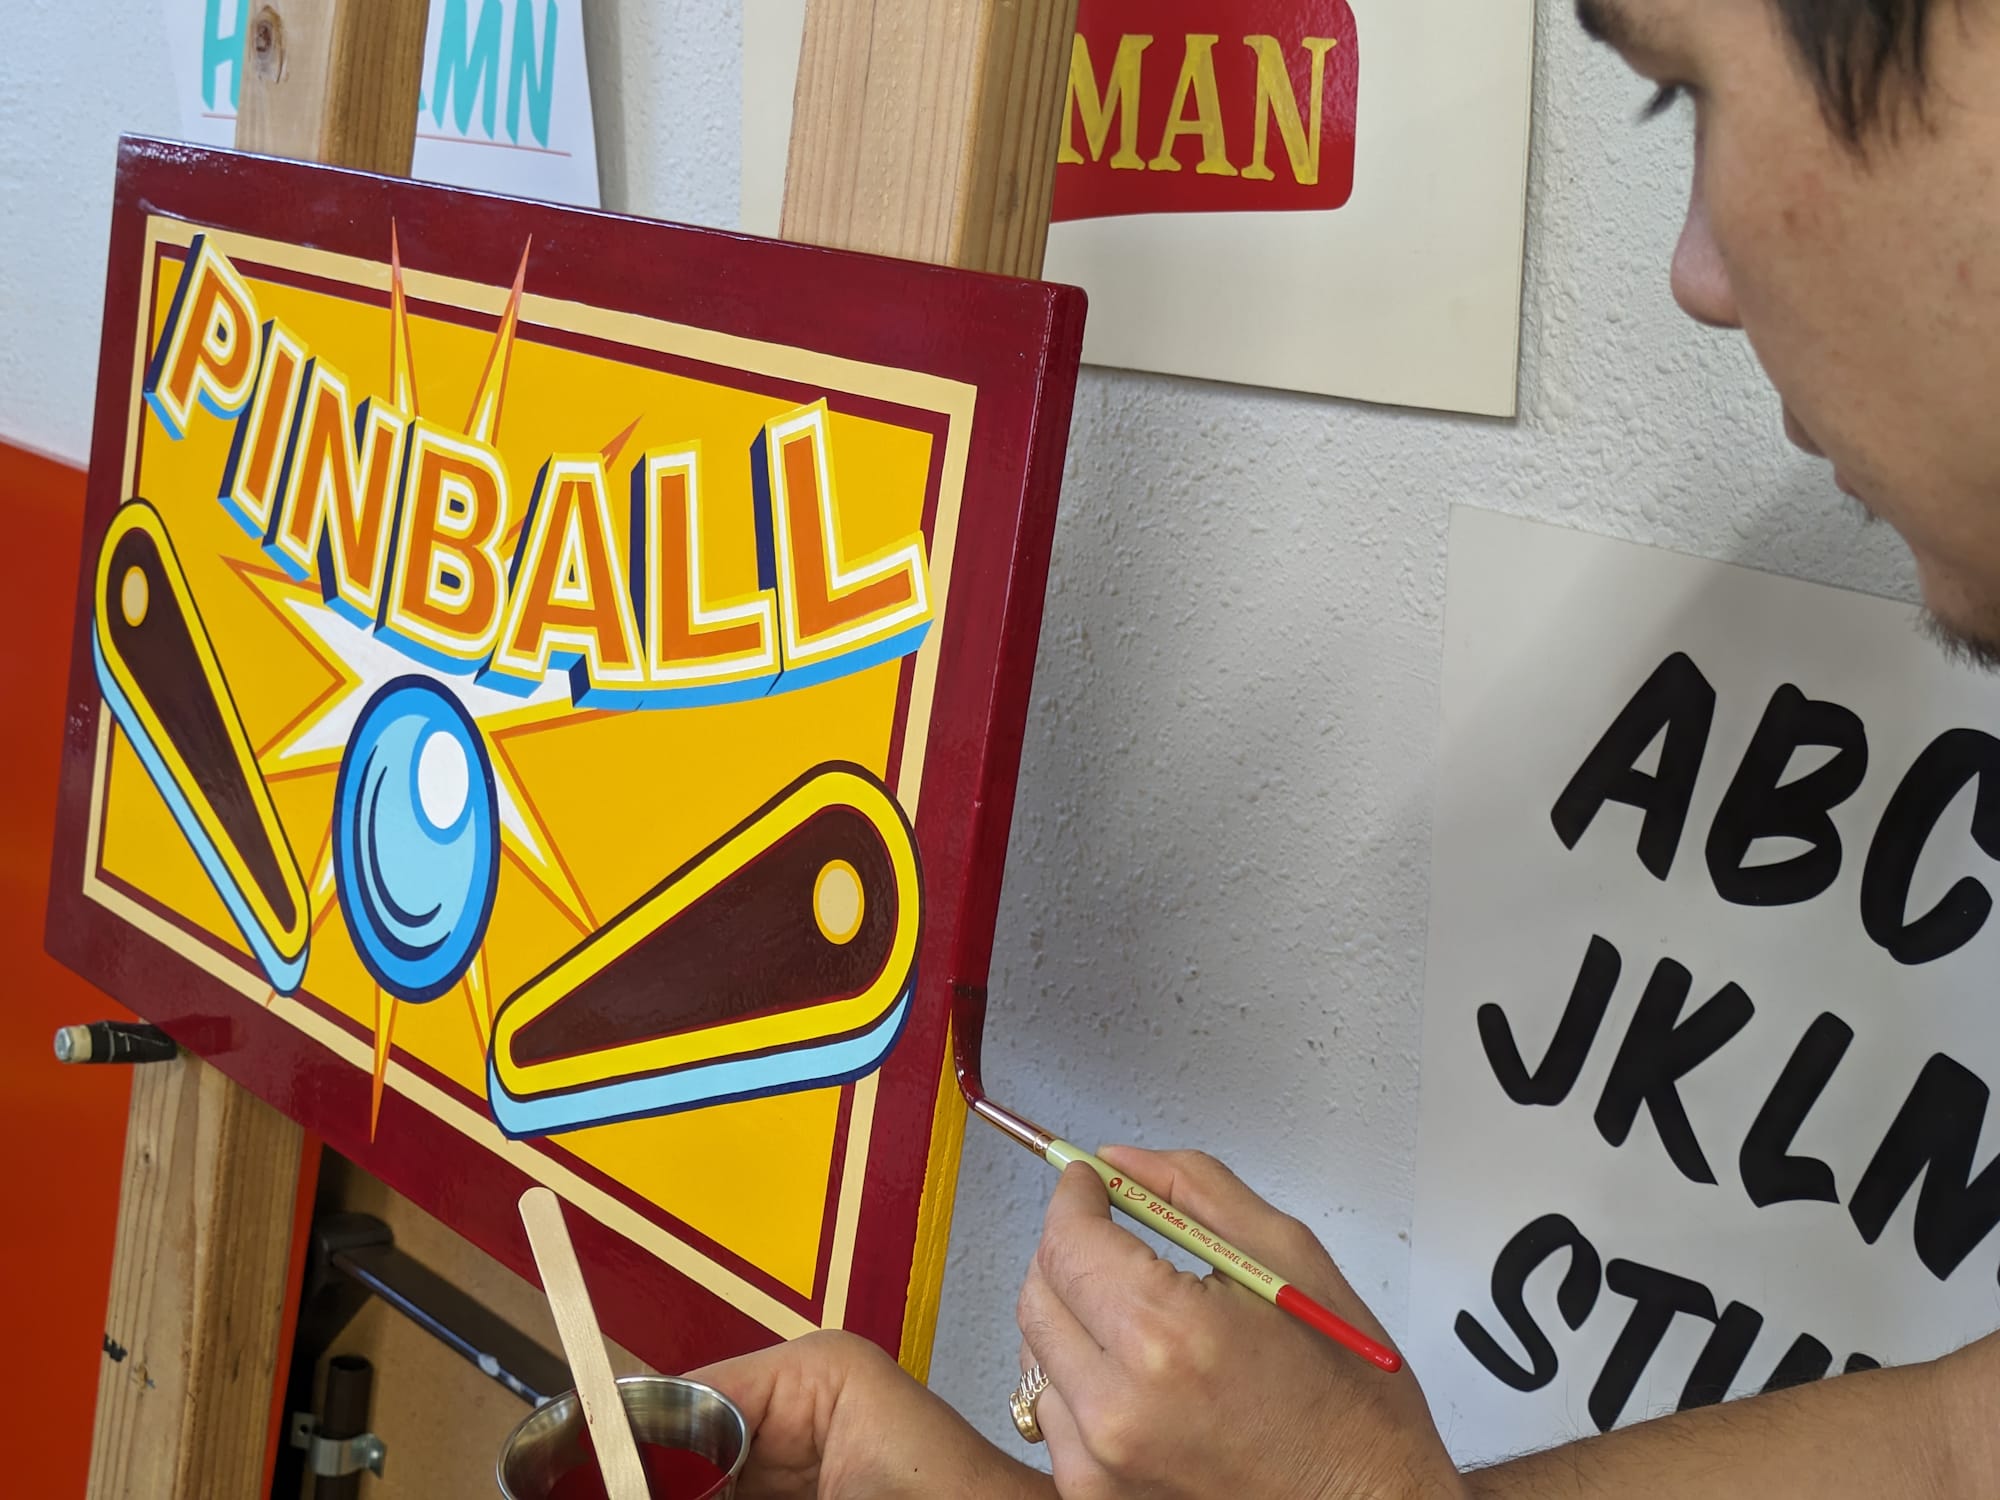 Main painting the edge of a flat panel with the front having the word 'Pinball' and an illustration of the ball and flippers.